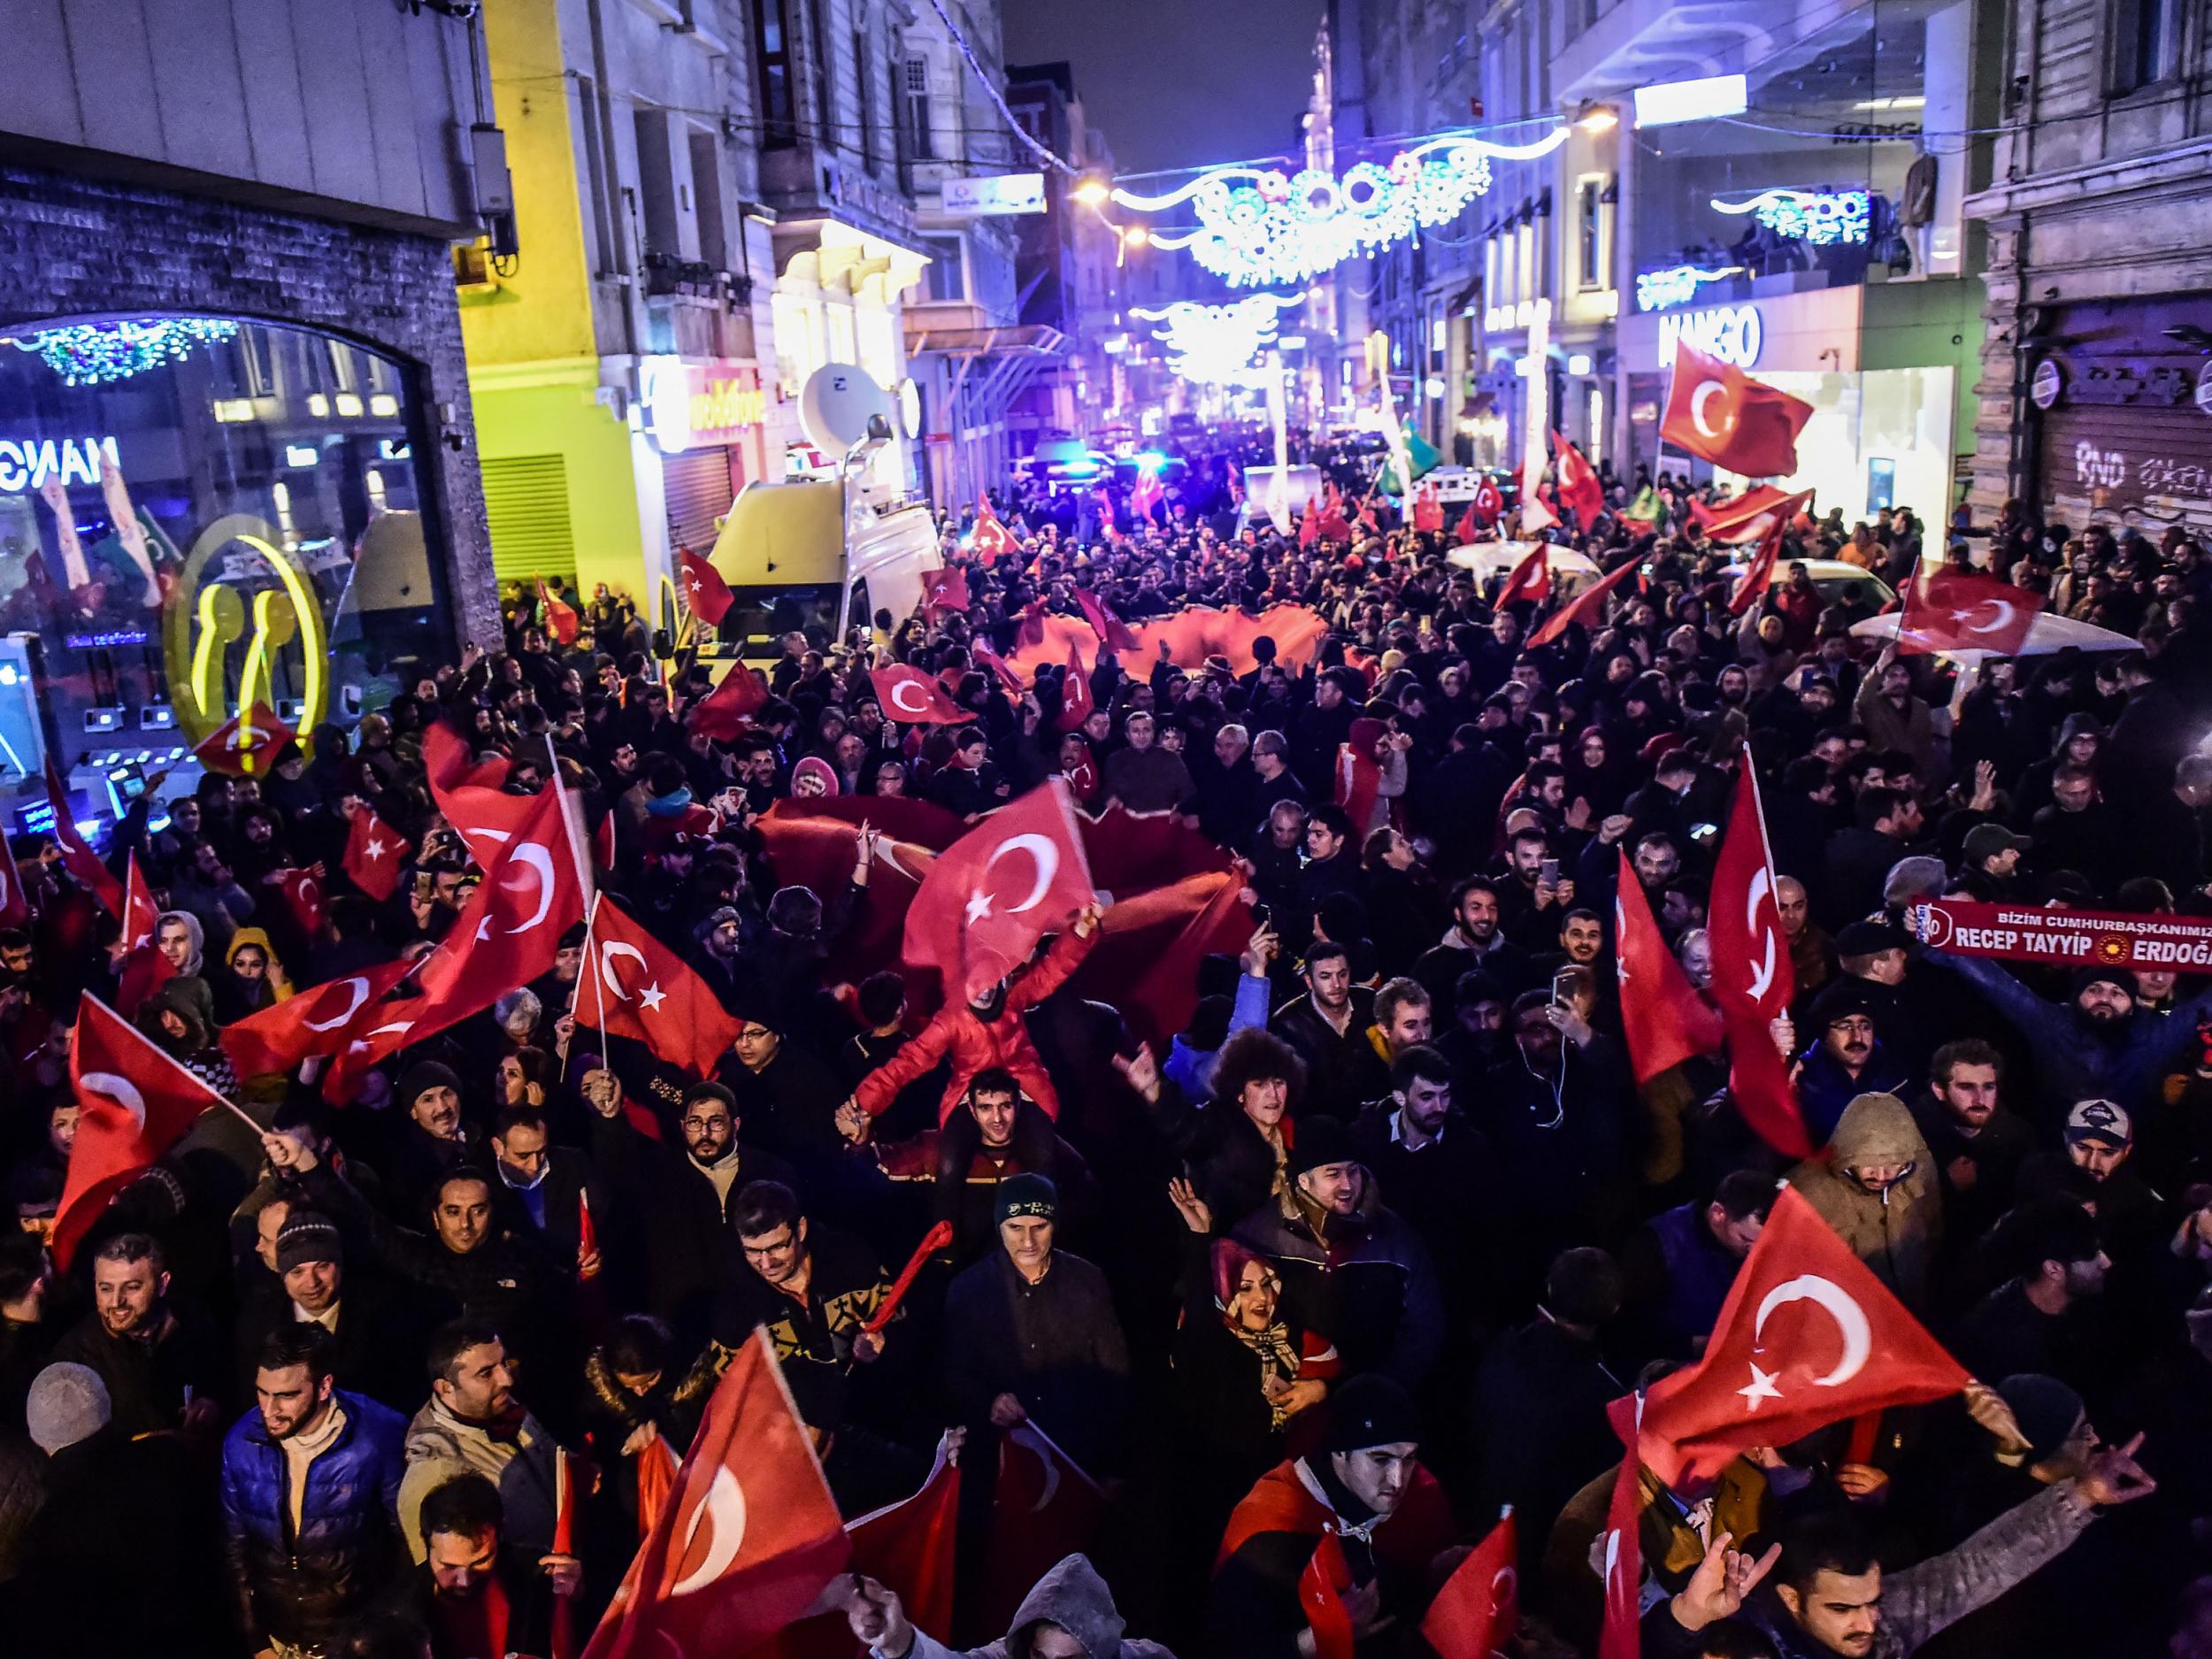 Protestors at a Saturday night demonstration in front of the consulate of the Netherlands in Istanbul